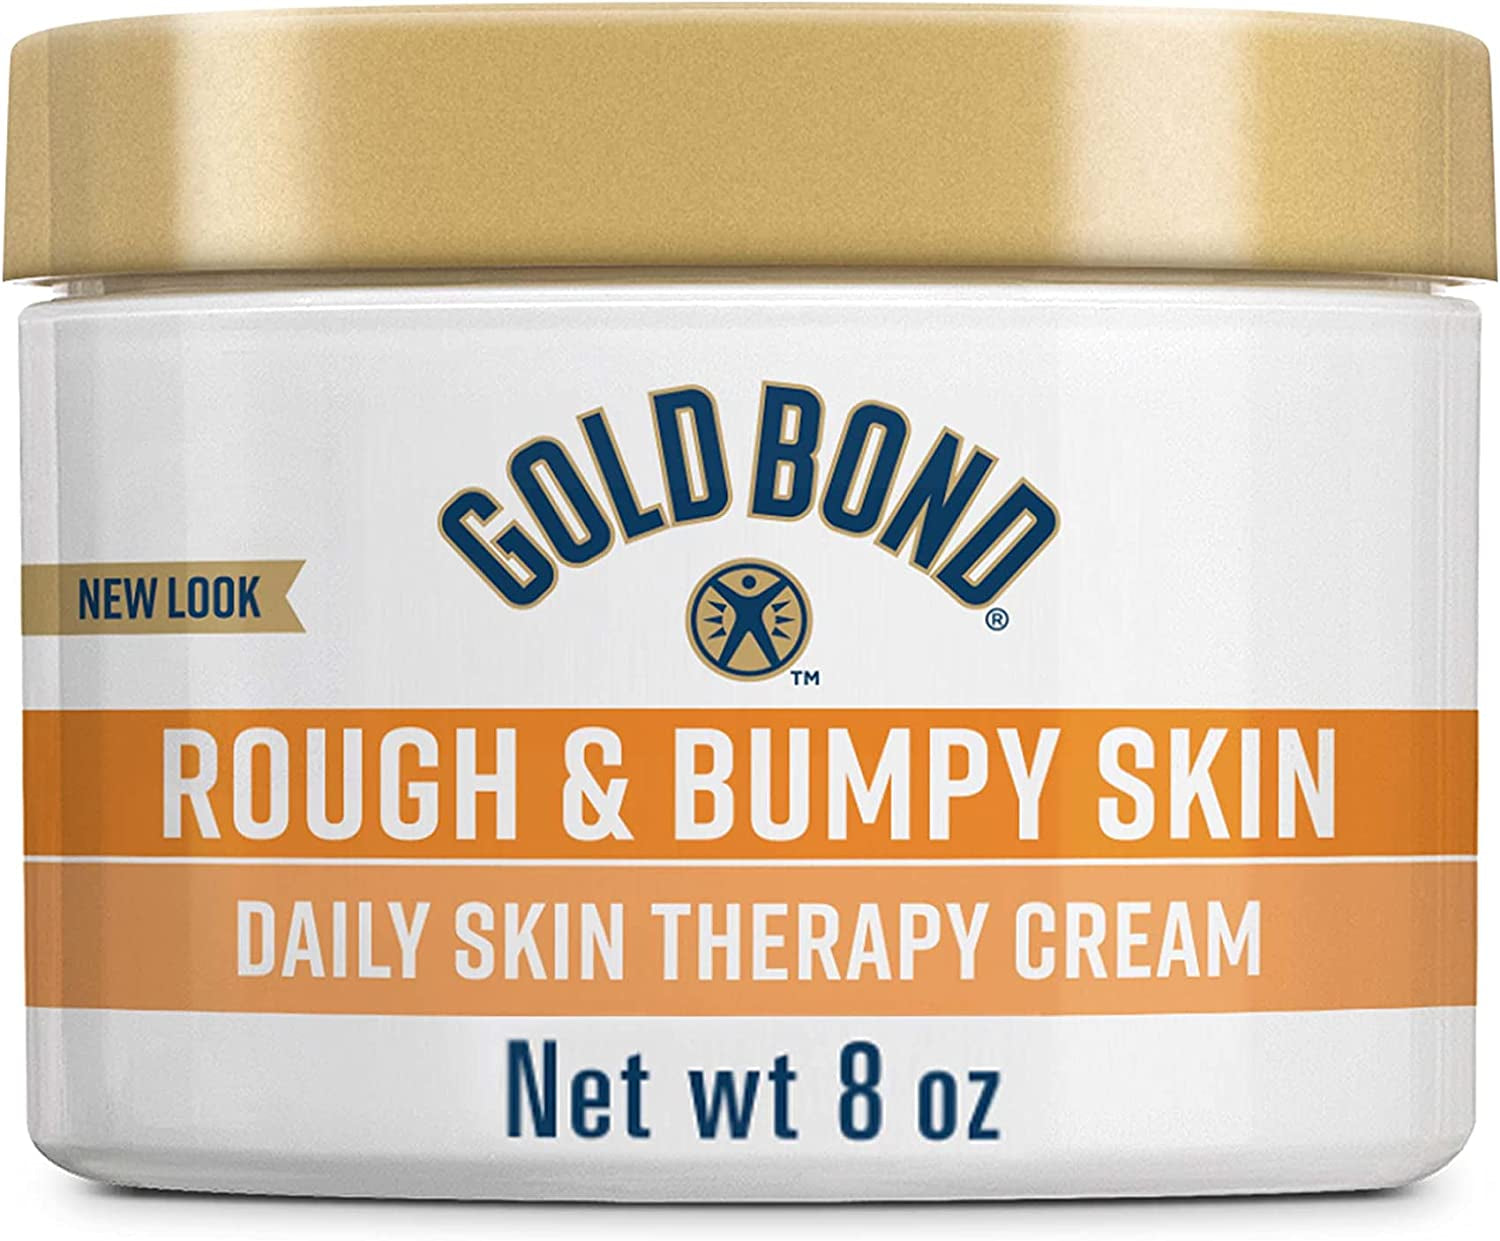 Gold Bond Ultimate Rough & Bumpy Daily Skin Therapy, 8 Ounce, Helps Exfoliate and Moisturize to Smooth, Soften, and Reduce the Appearance and Feel of Bumps and Rough Skin Patches (Packaging May Vary)